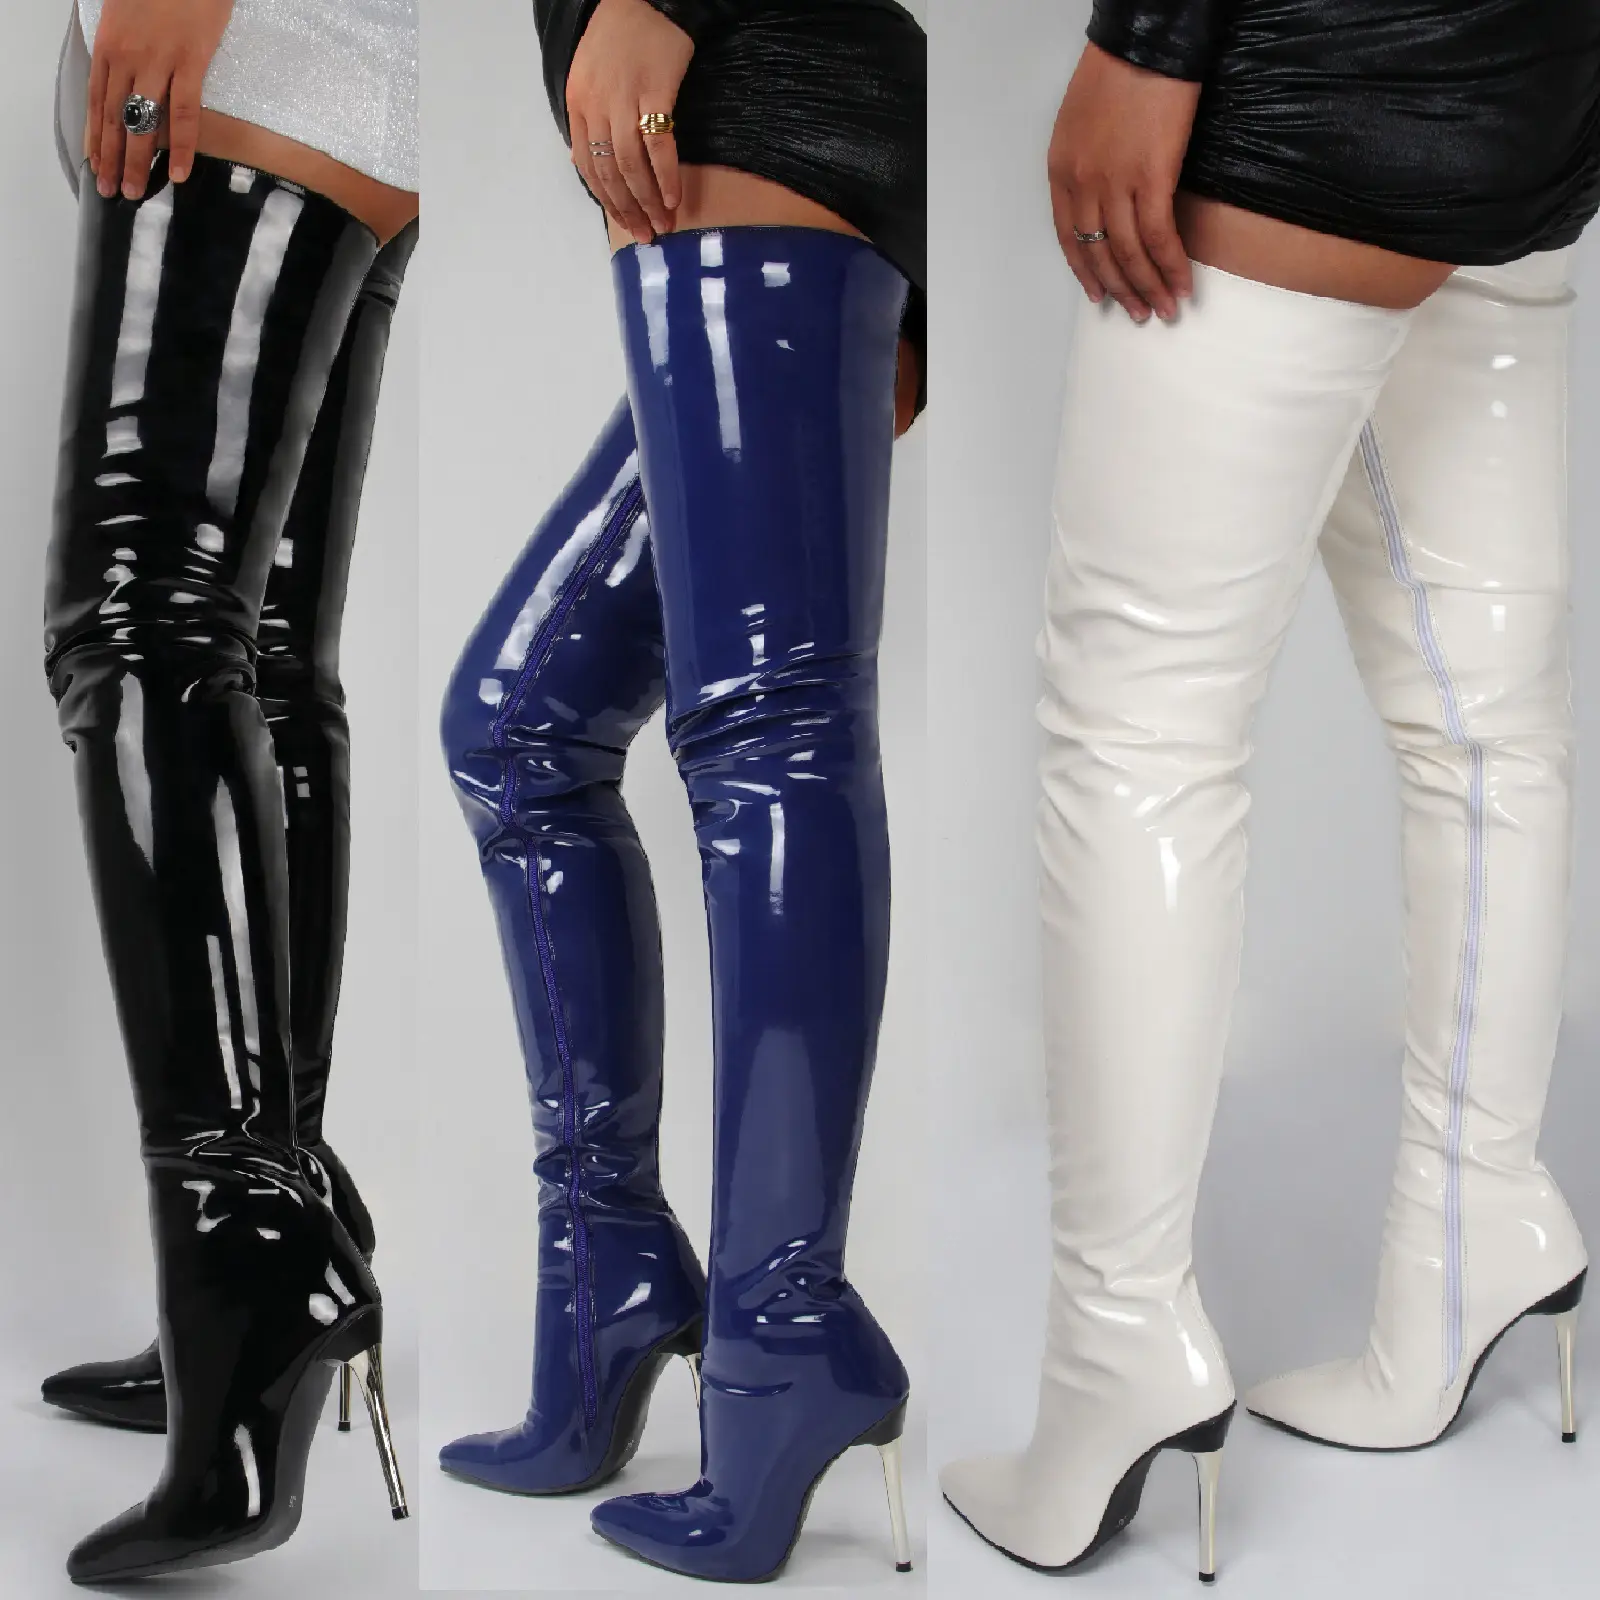 PDEP super stretchy thigh high tight up to leg women boots pointed toe shining 2022 high heel over the knee boots for women